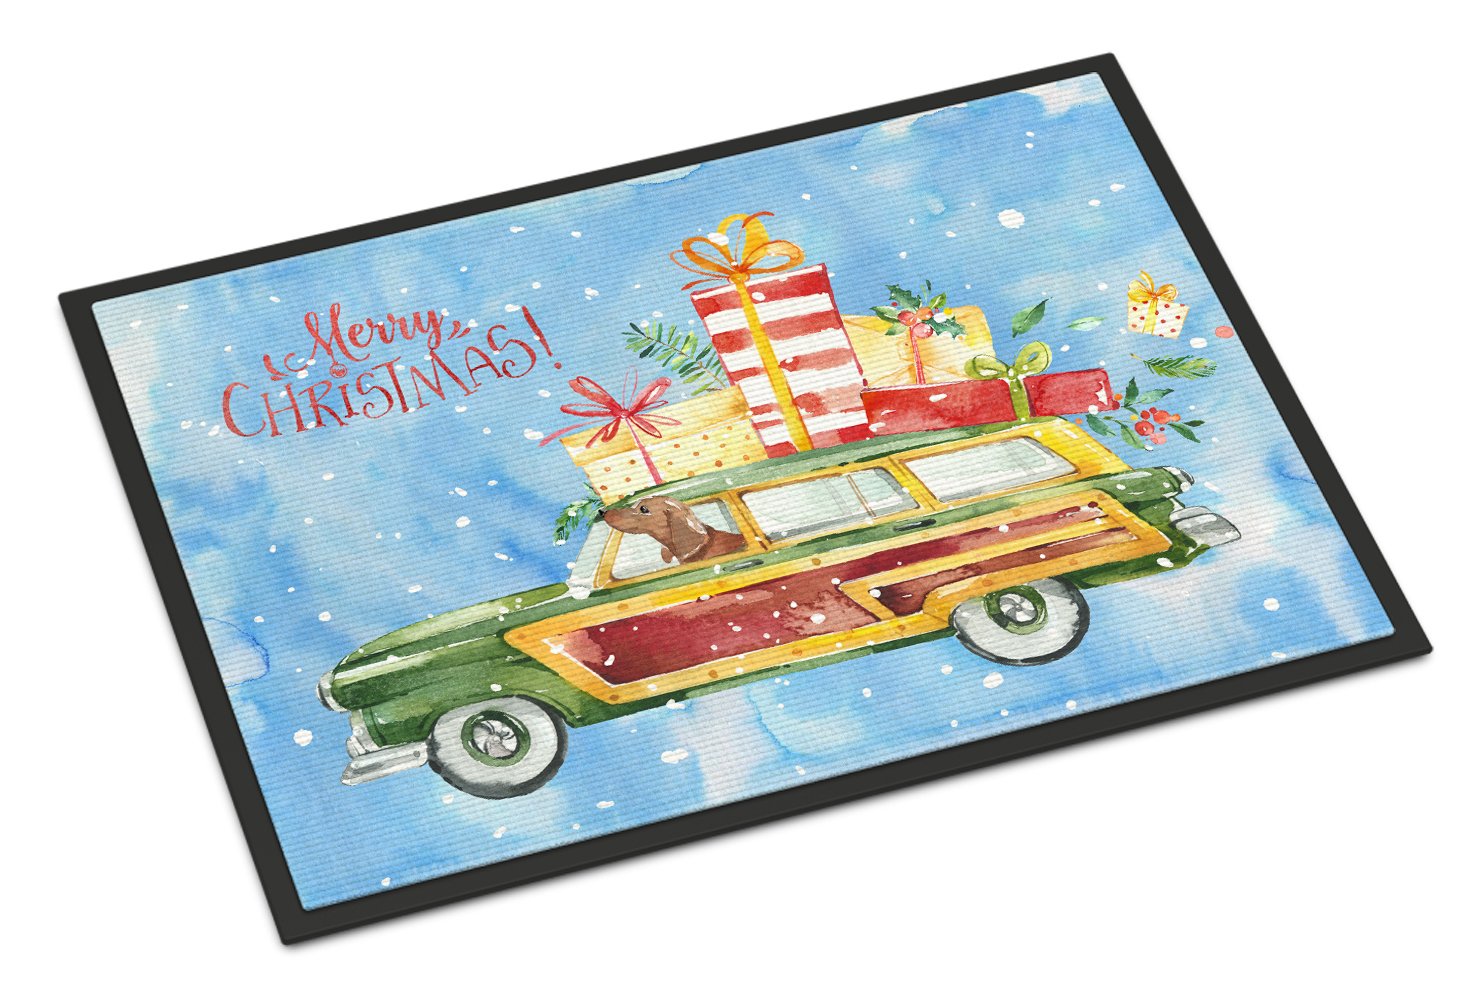 Merry Christmas Red Dachshund Indoor or Outdoor Mat 24x36 CK2465JMAT by Caroline's Treasures